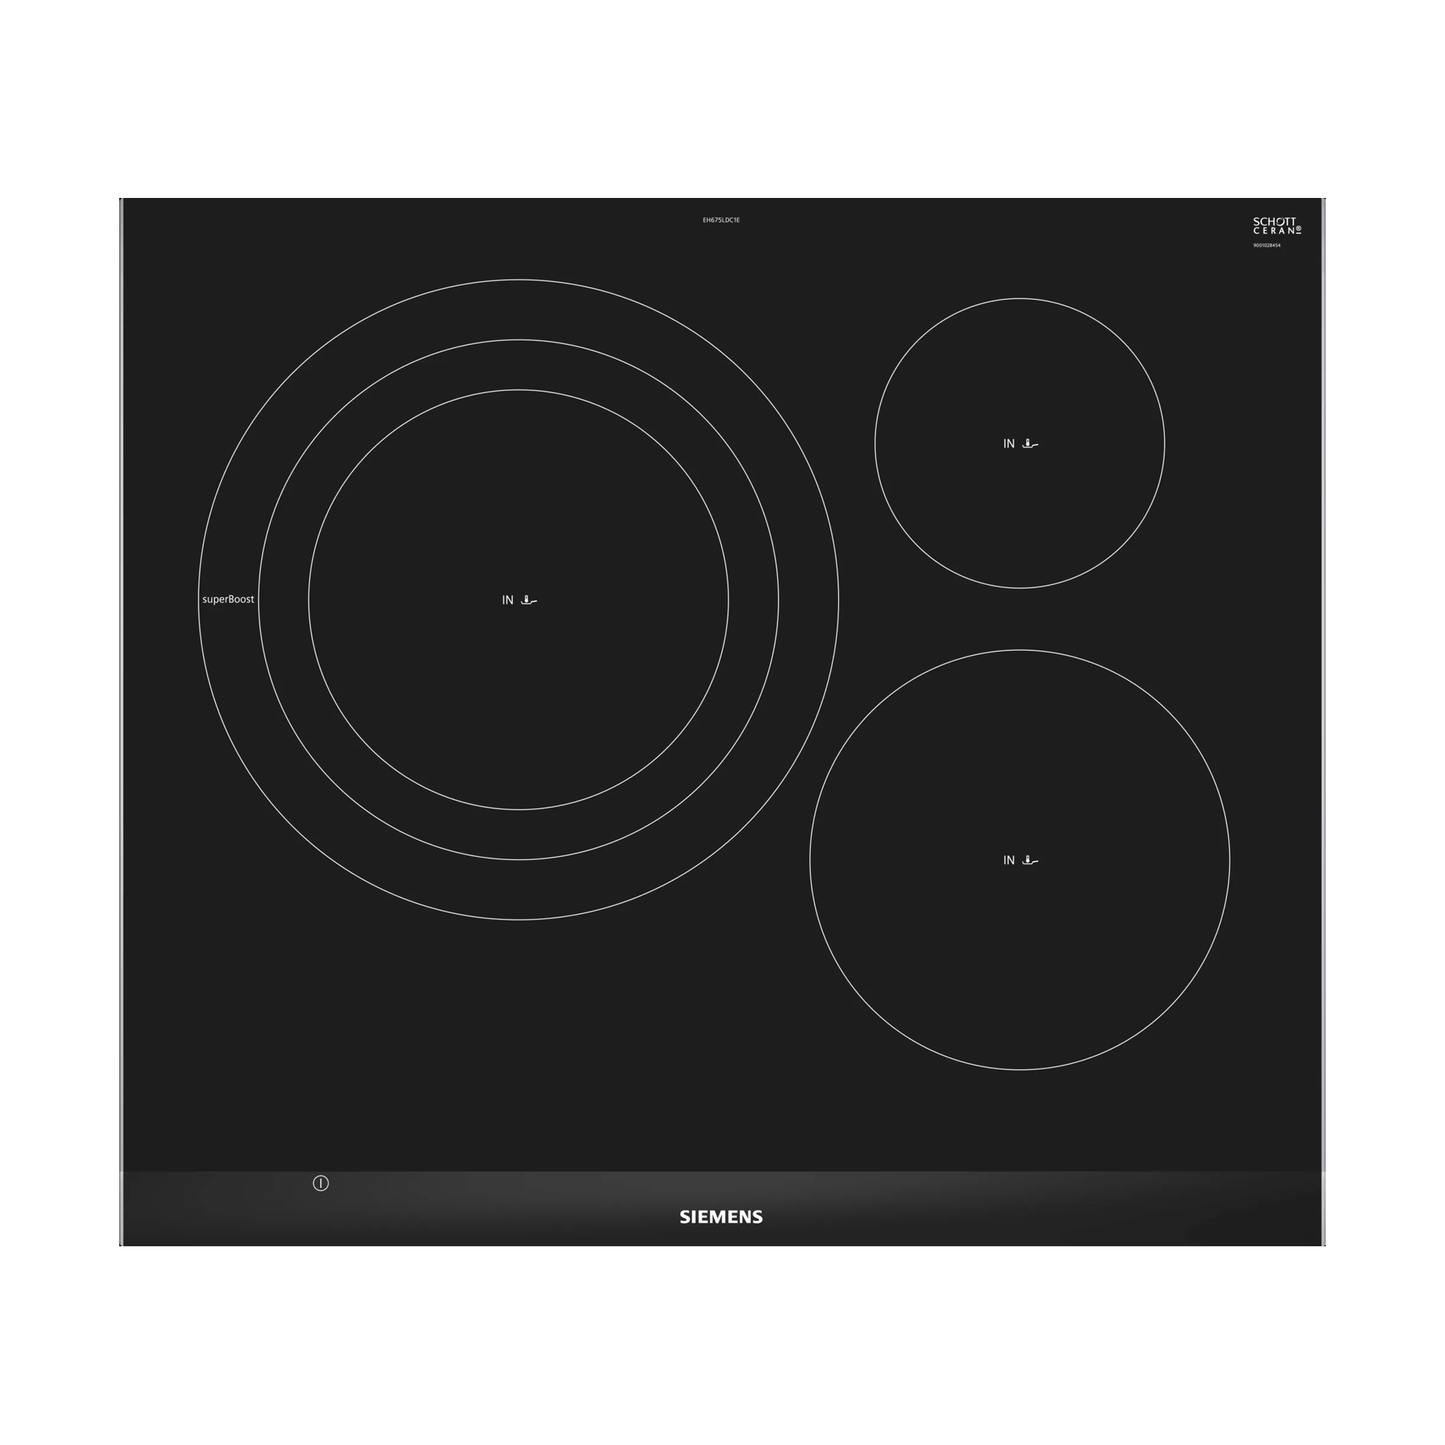 SIEMENS iQ300 EH675LDC2E 600mm Induction hob | Made in Europe |